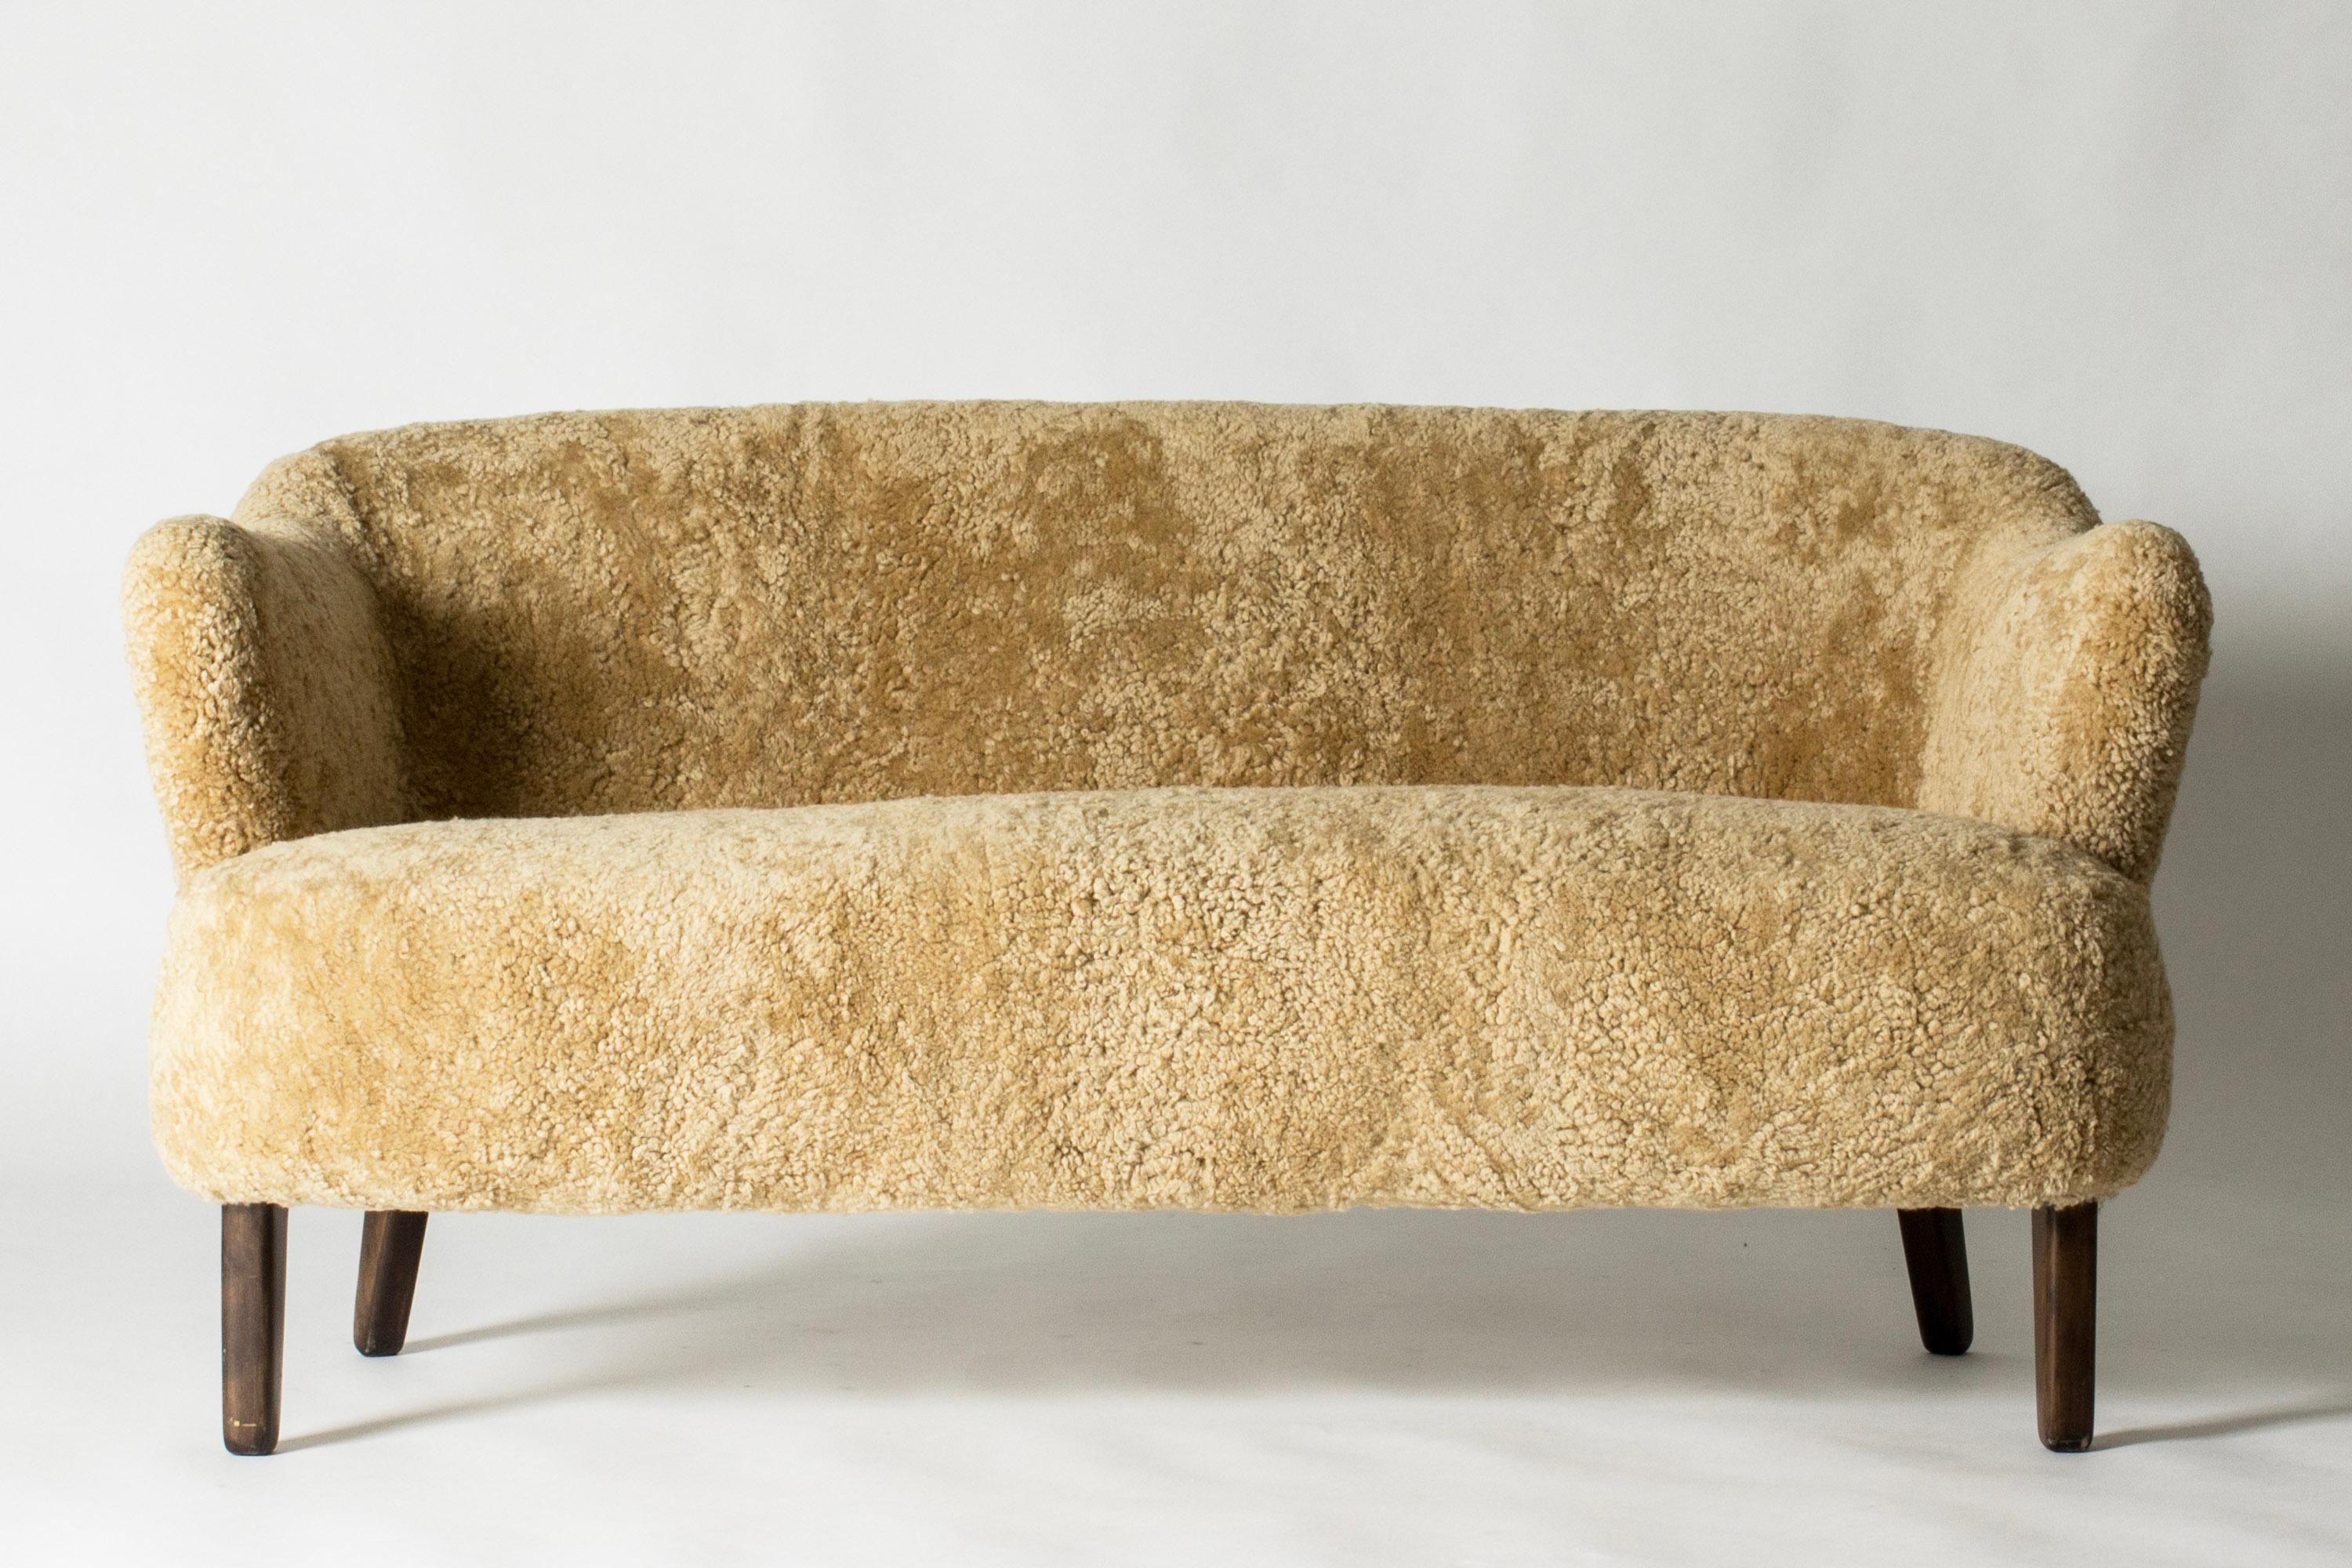 Beautiful “Ingeborg” sofa by Flemming Lassen, with curvesome forms. Designed in 1940 and named after his mother, the artist Ingeborg Winding. Upholstered with caramel colored sheepskin, stained wood legs.